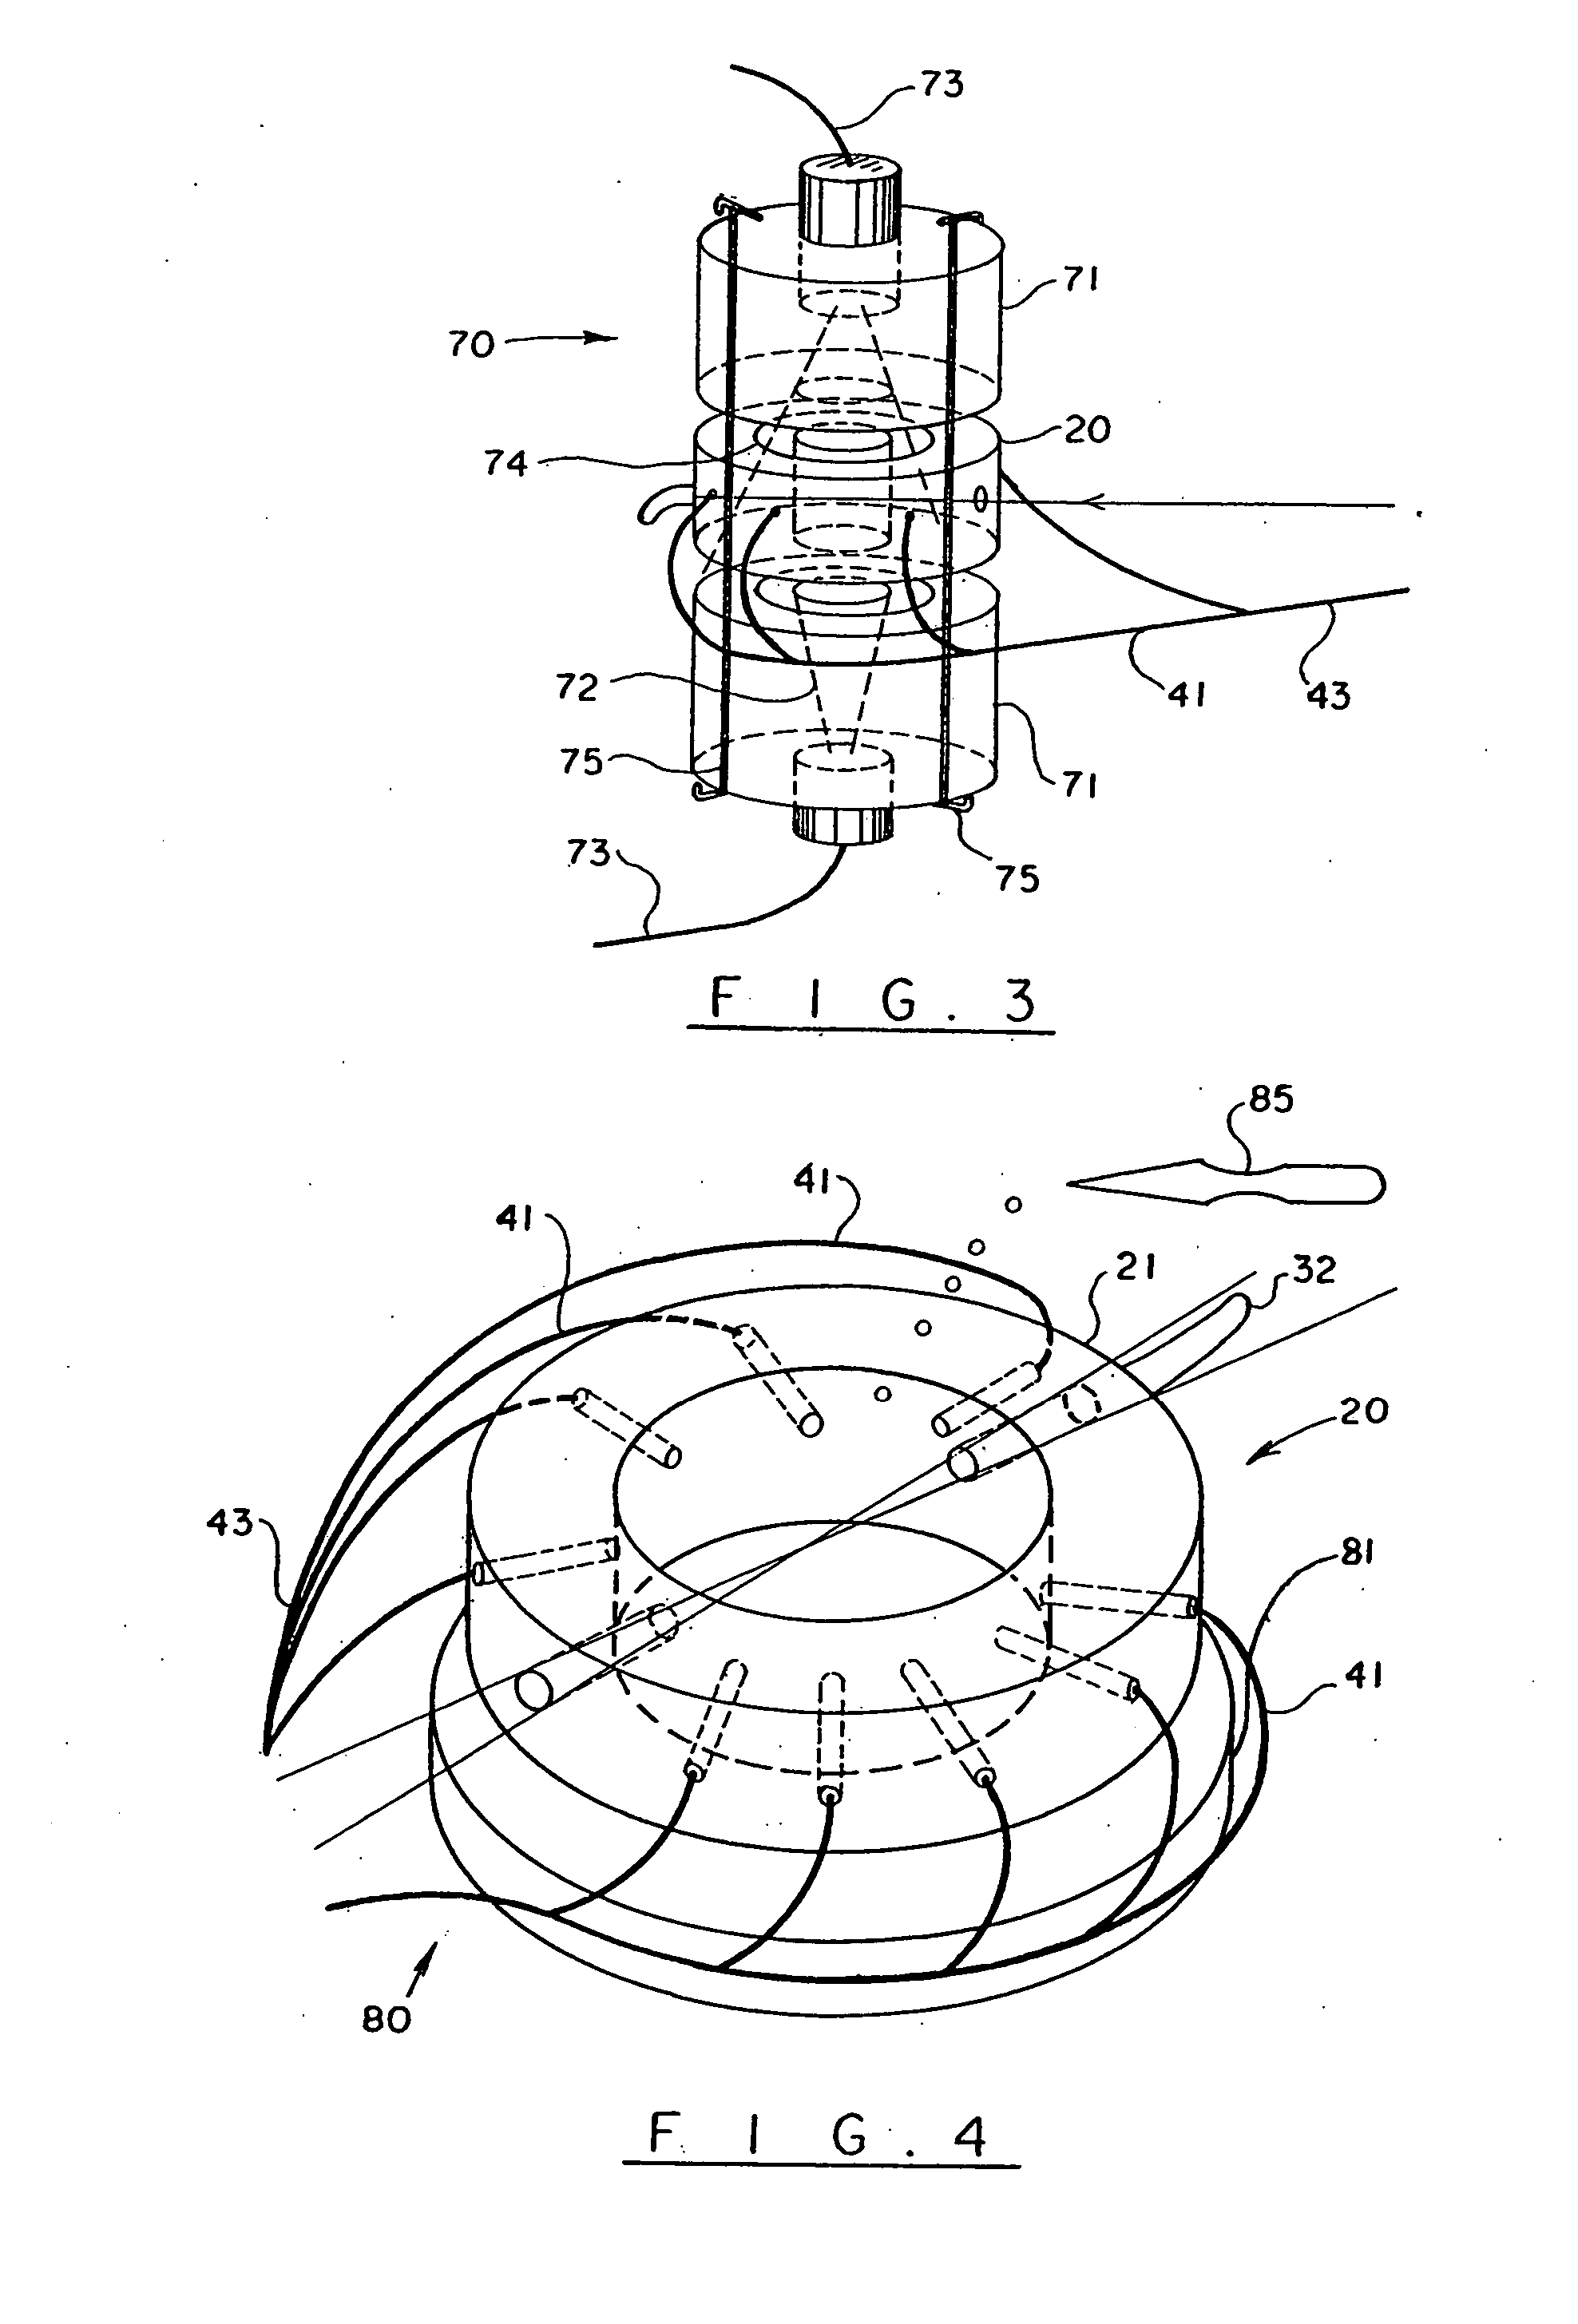 Automatic sampling and dilution apparatus for use in a polymer analysis system